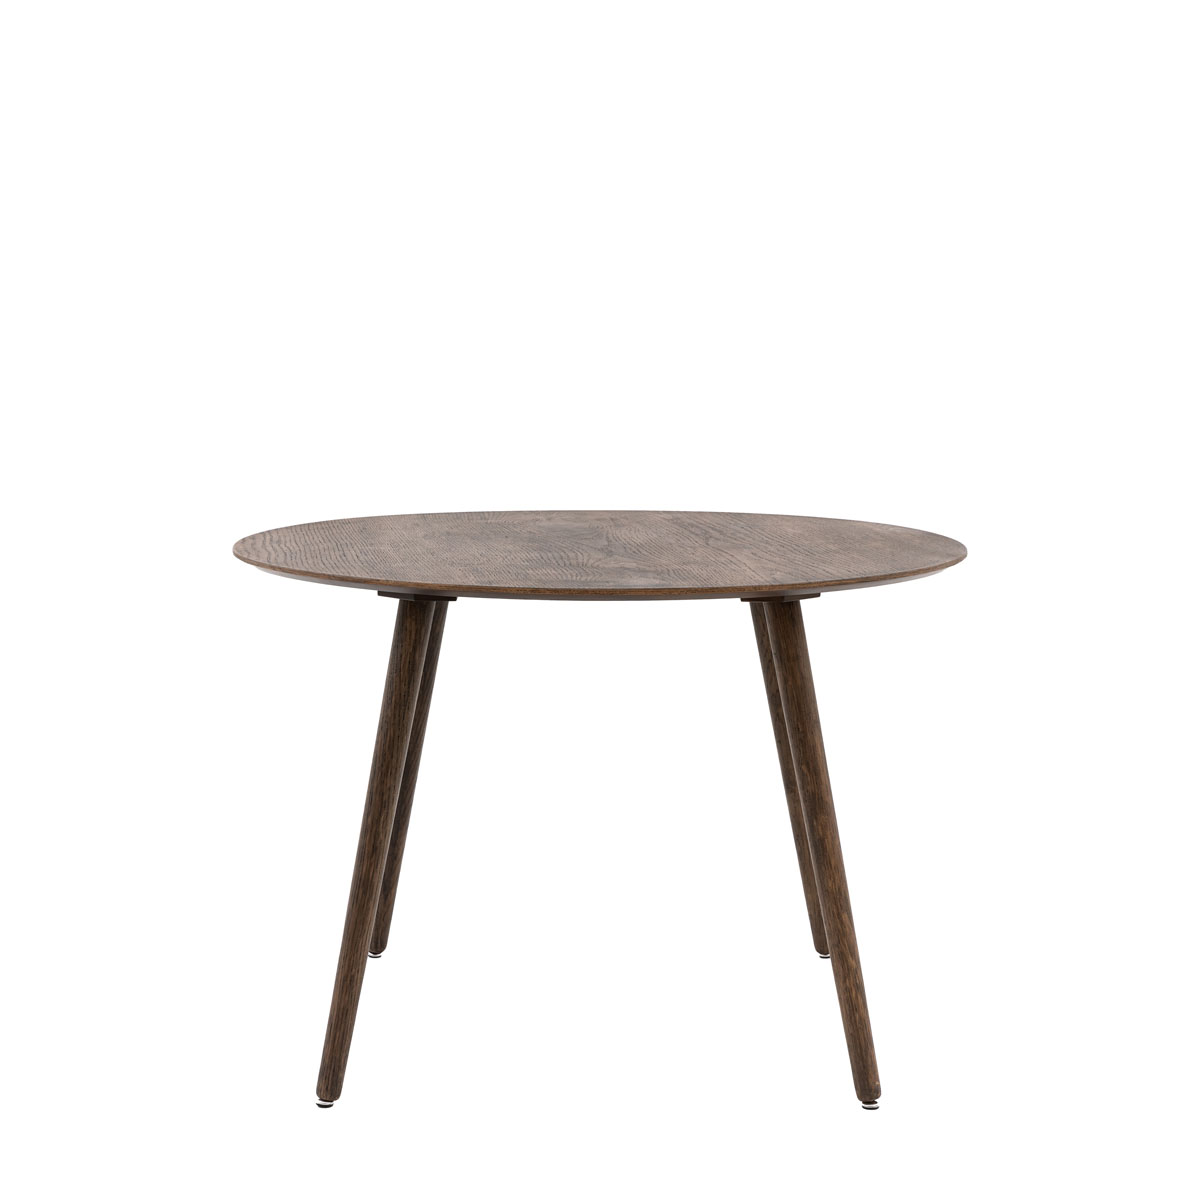 Hatfield Round Dining Table Smoked 1100x1100x750mm